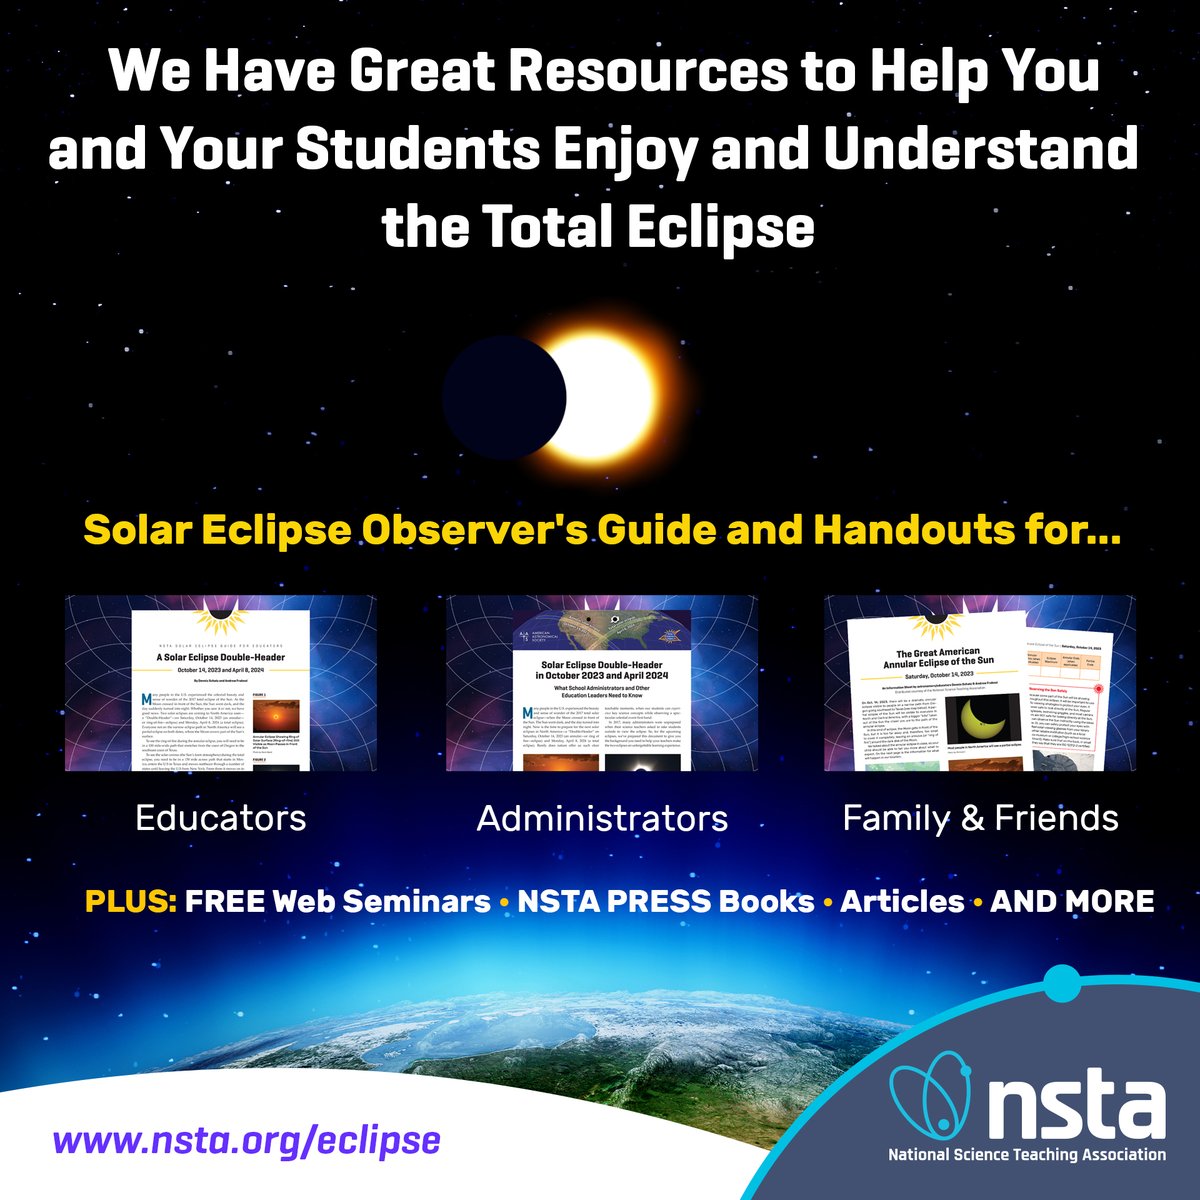 Are you ready for the #solareclipse happening April 8th? Don’t worry, there’s still time to prepare! #NSTA has a host of resources available to science educators of all kinds to help you and your students understand the total eclipse! Check them out at bit.ly/4ctFaCD!